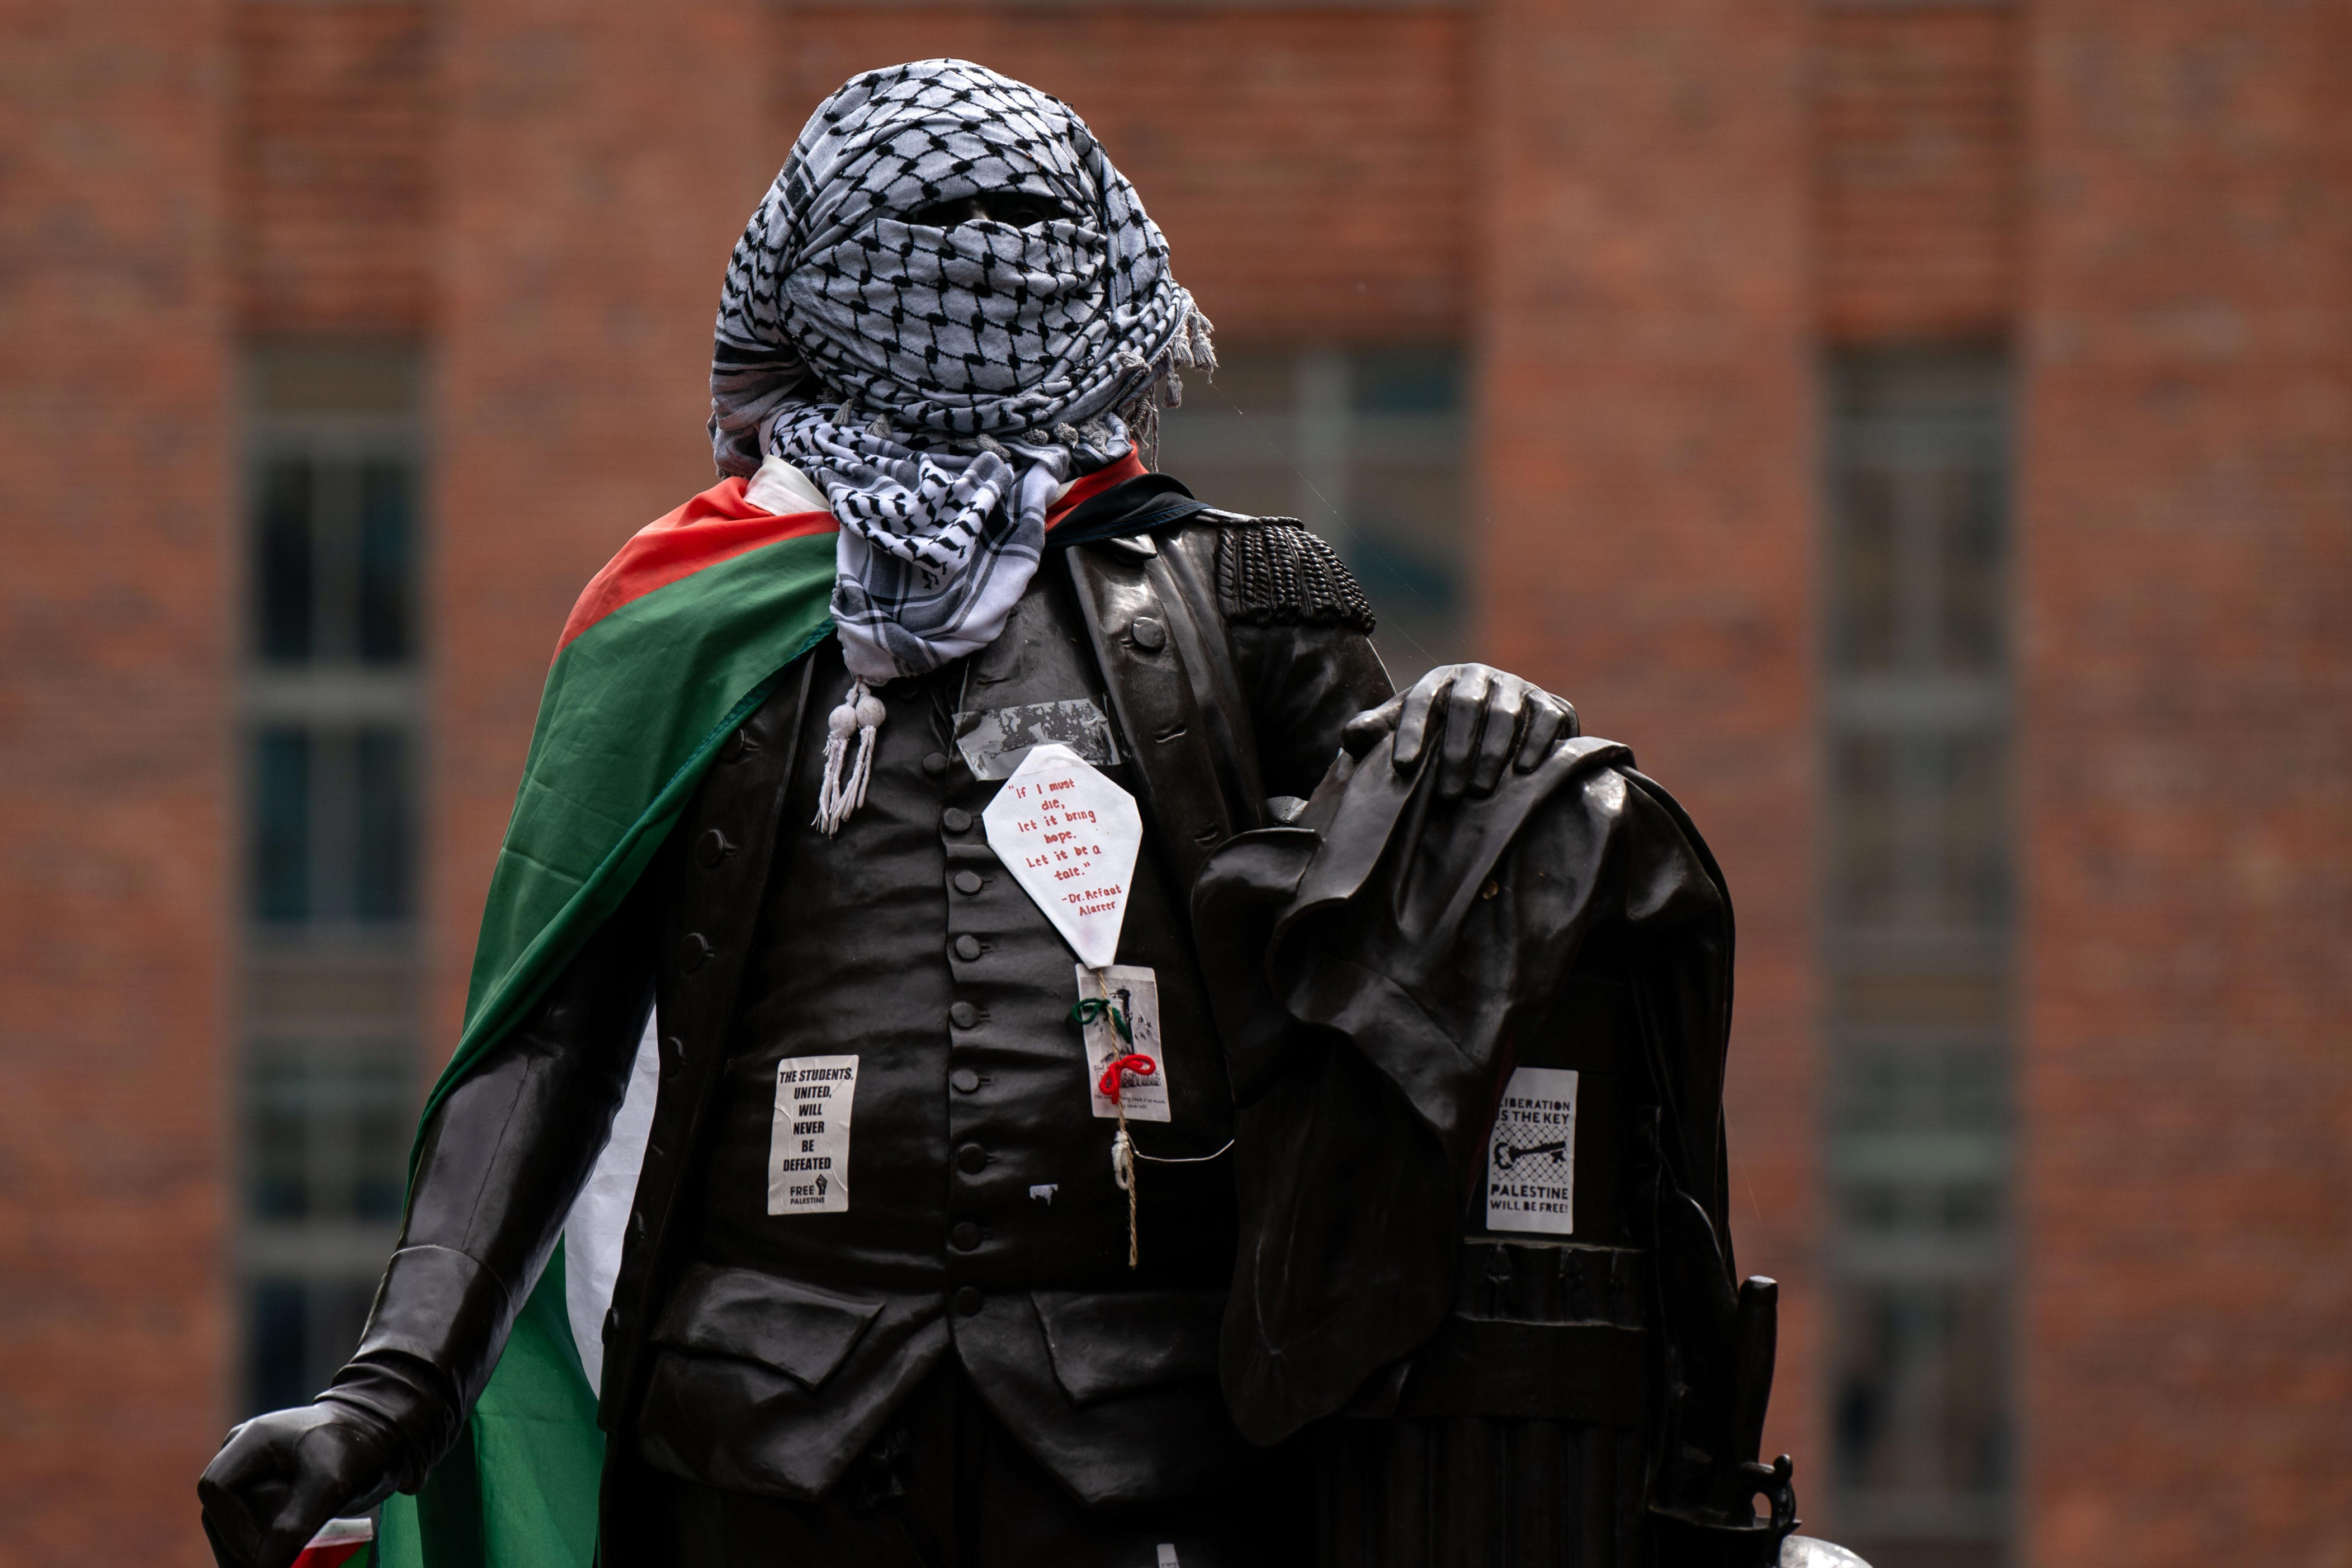 washington, dc, police raid on gwu's pro-palestinian tent camp ends in arrests, pepper spray